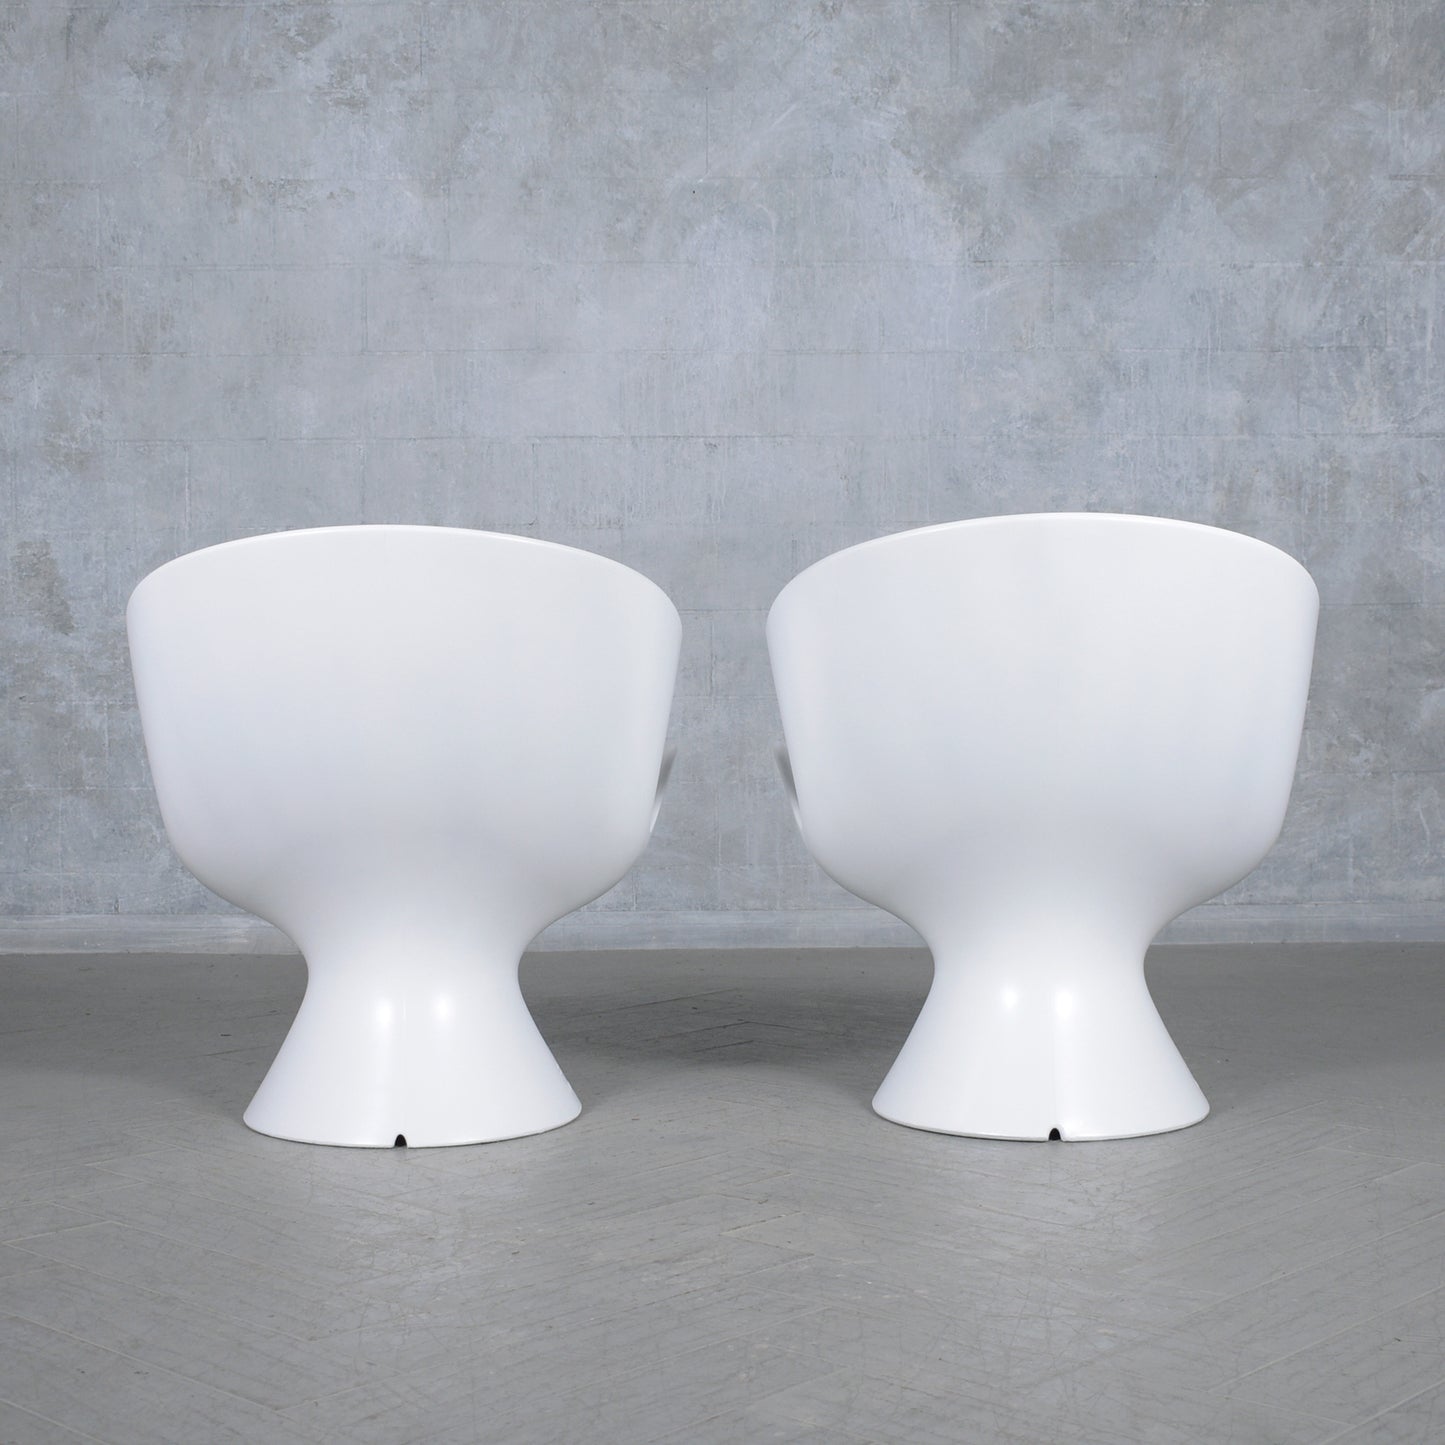 Vintage Post-Modern Lounge Chairs in White Lacquer Finish - Expertly Restored